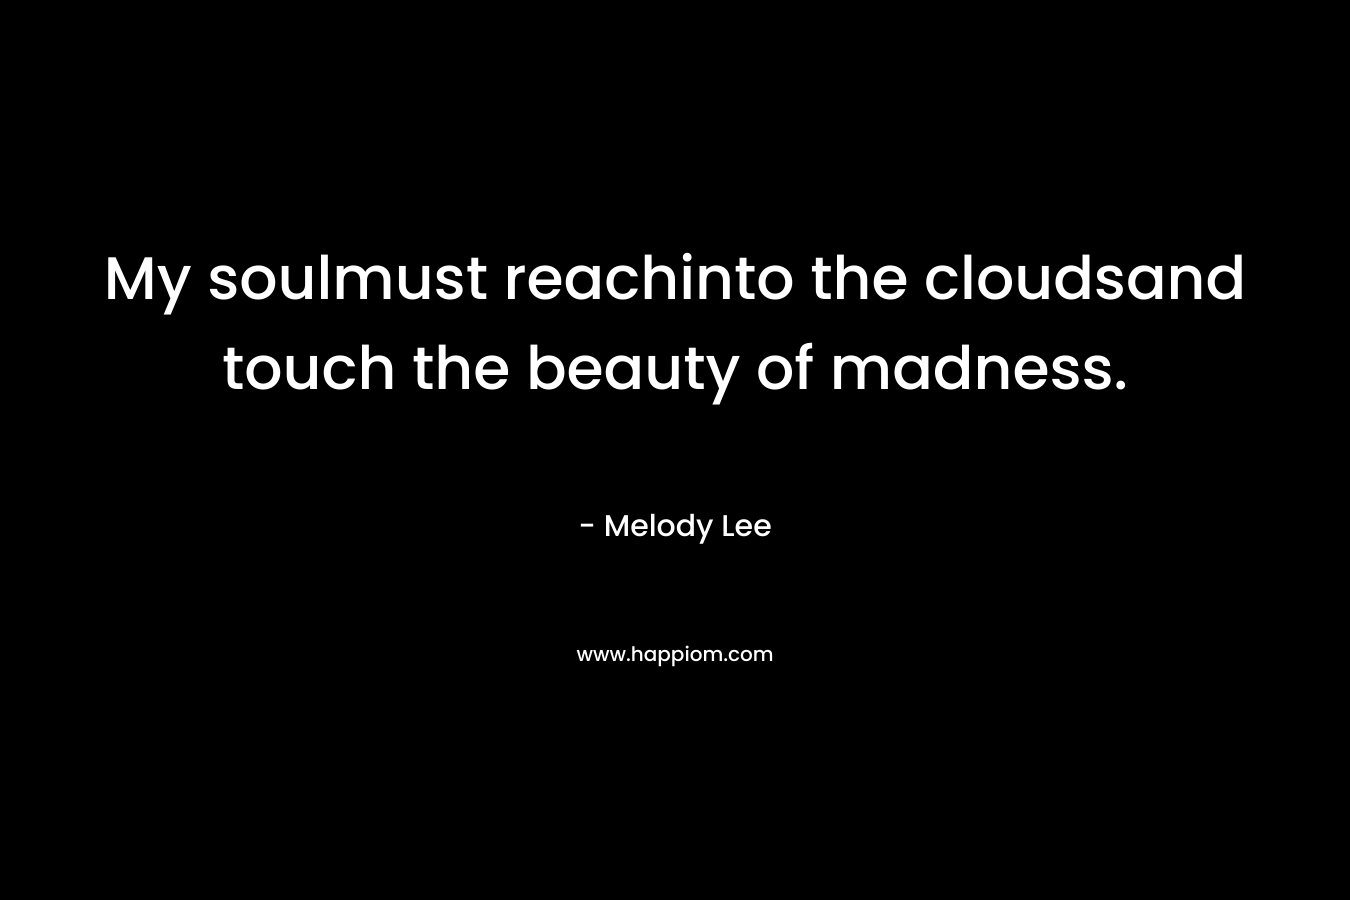 My soulmust reachinto the cloudsand touch the beauty of madness.